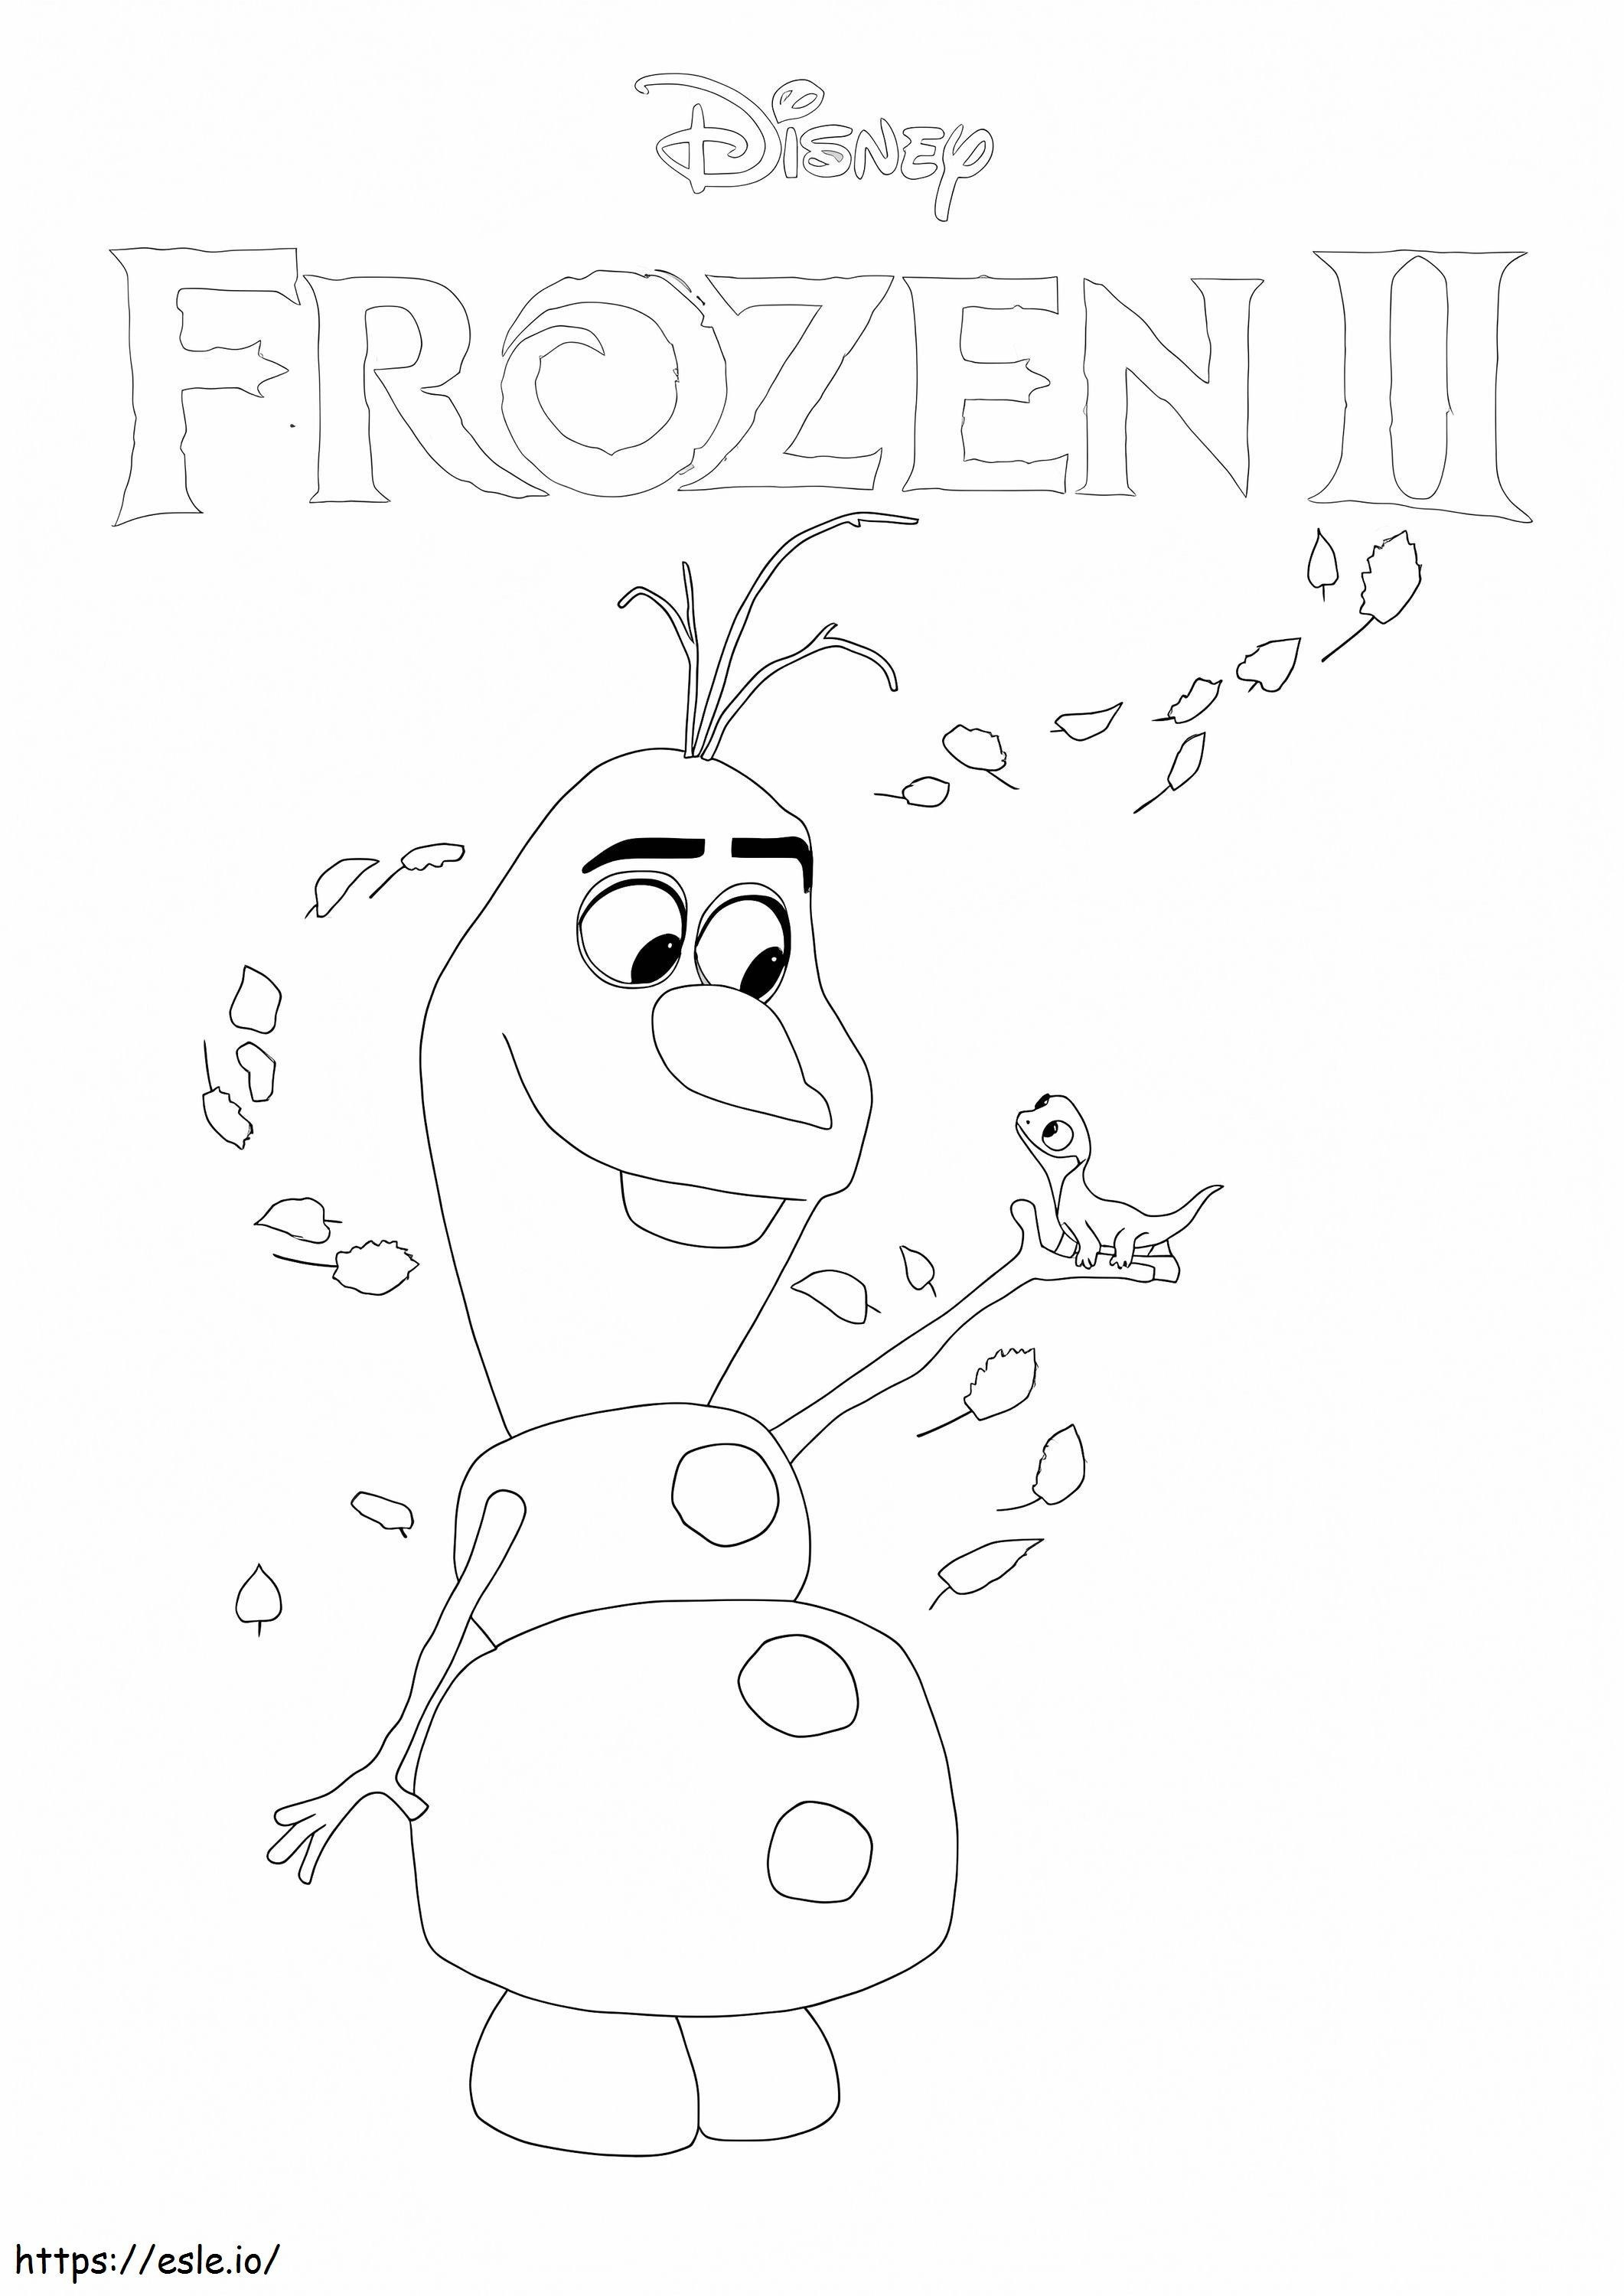 Frozen Olaf And Bruni 2 coloring page